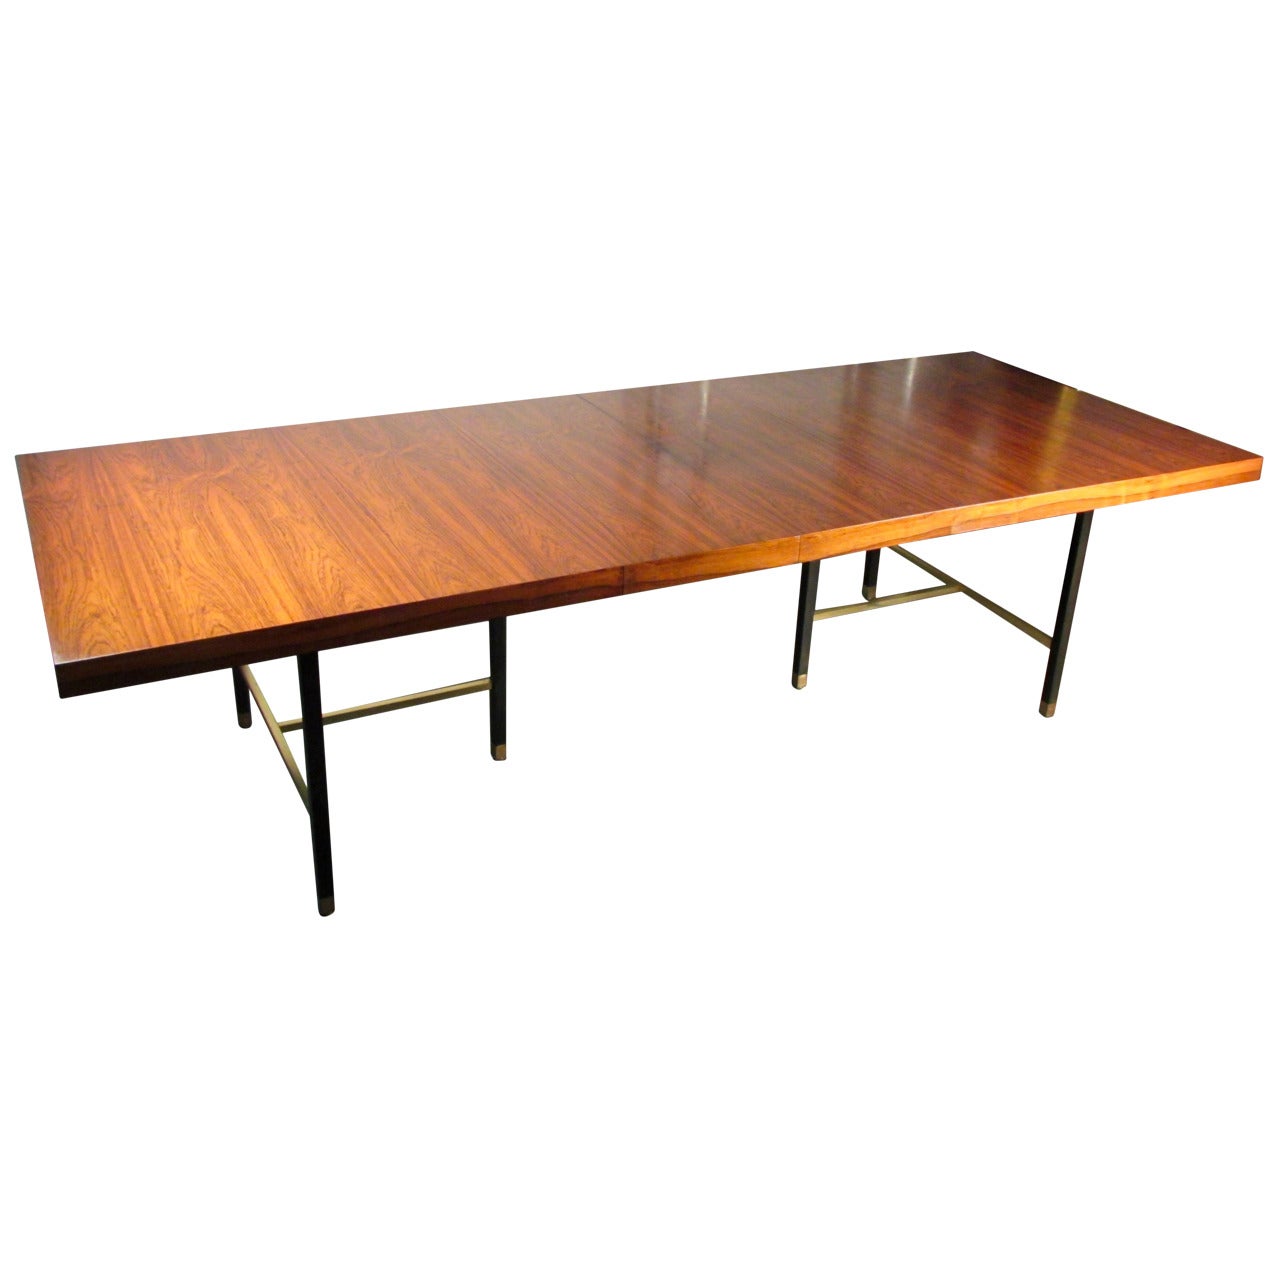 Stunning Rosewood and Brass Dining Table by Harvey Probber Studio, 1965